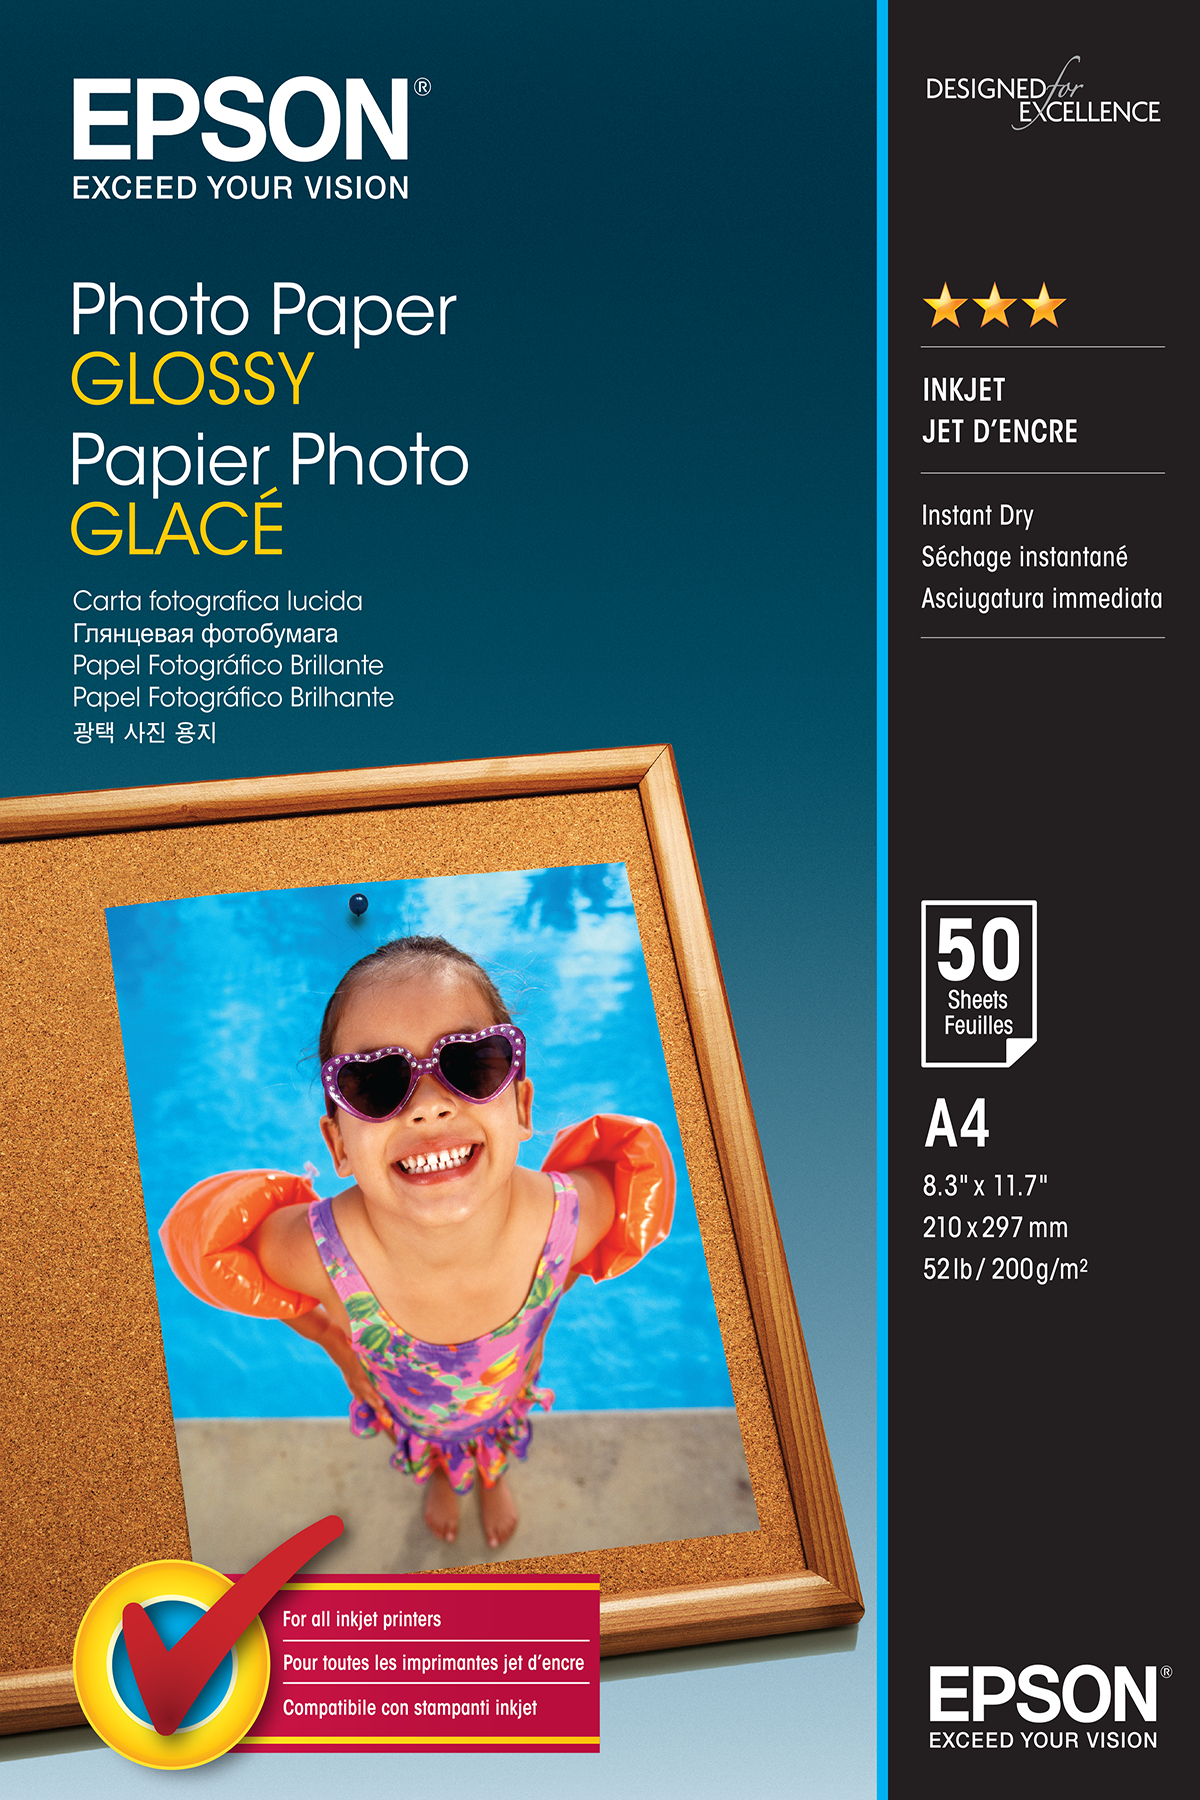 Photos - Office Paper Epson Photo Paper Glossy - A4 - 50 sheets C13S042539 